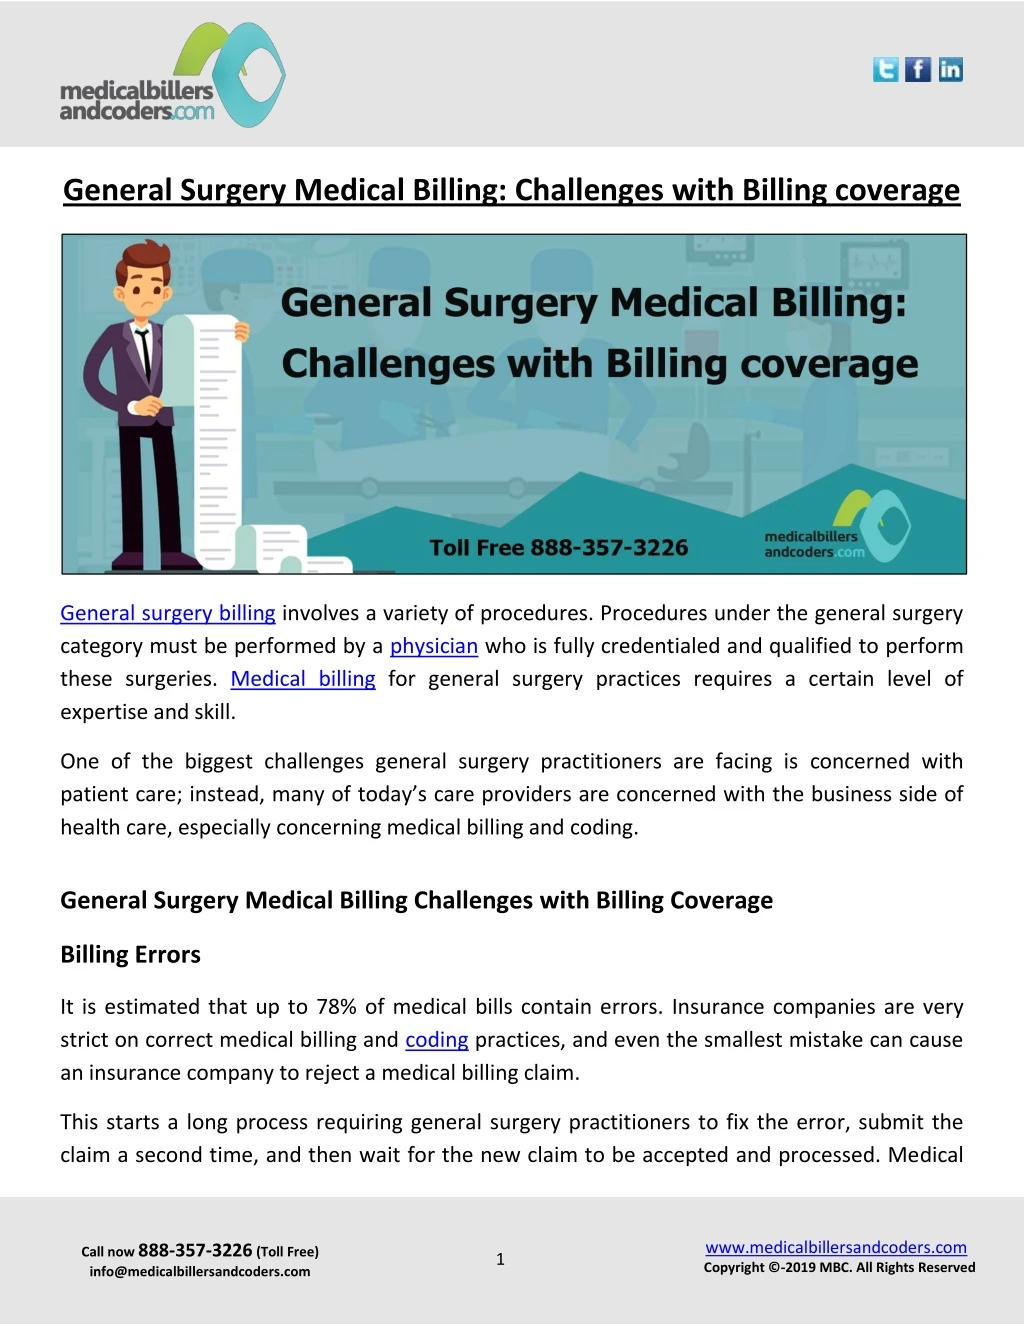 general surgery medical billing challenges with